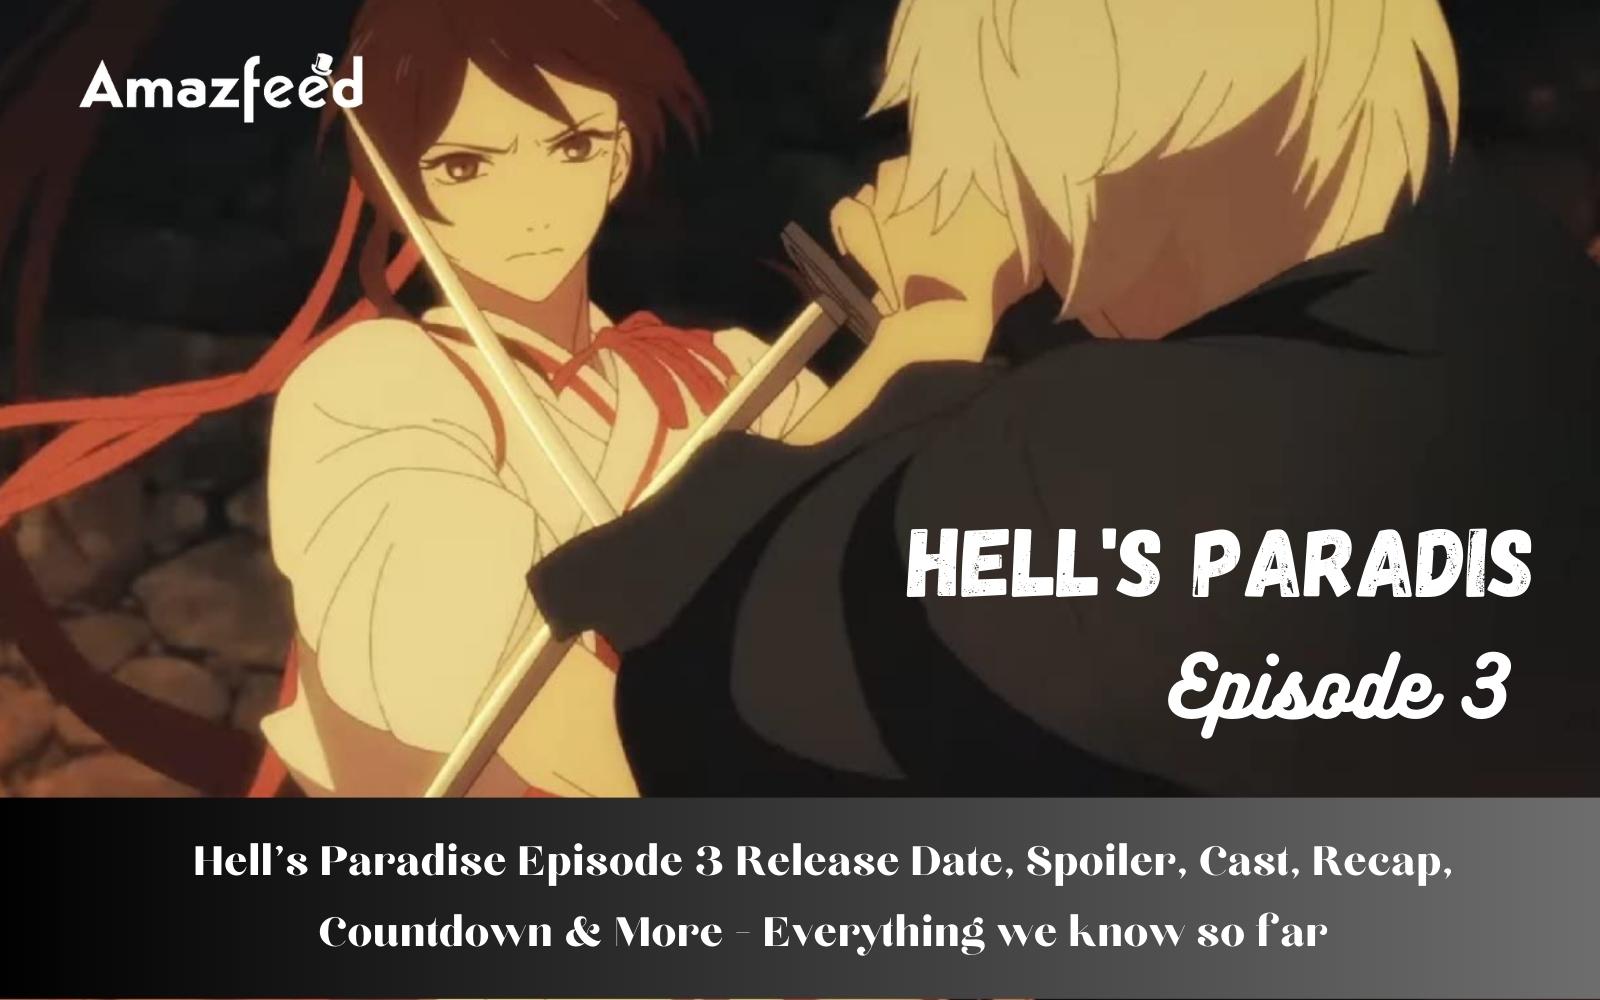 Hell's Paradise Episode 14 Release Date and Time, COUNTDOWN